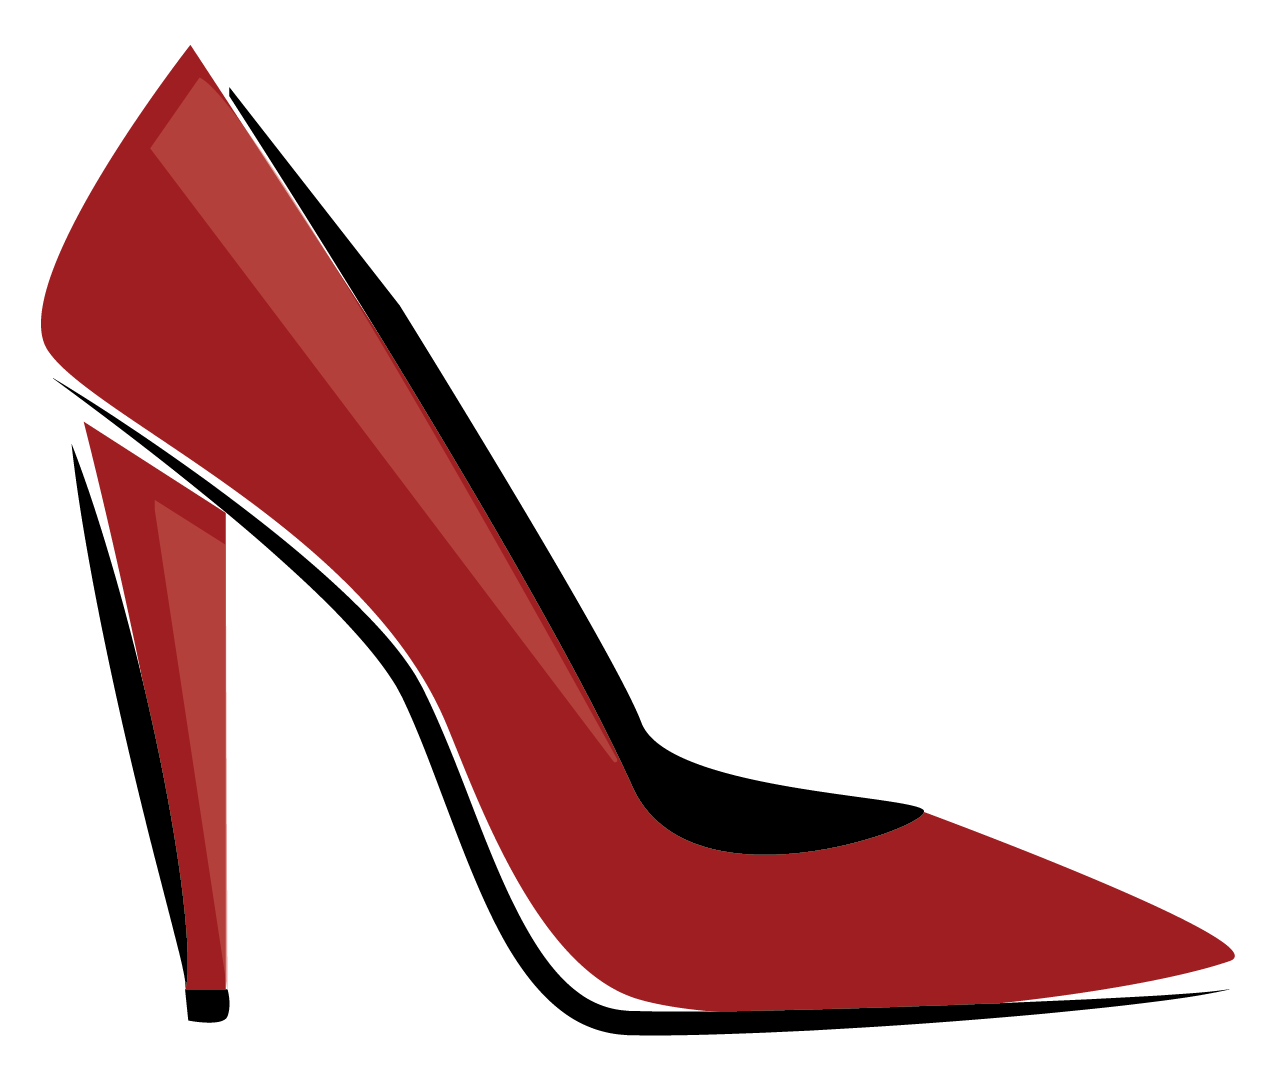 Walk A Mile In Her Shoes Donations - Women In Need